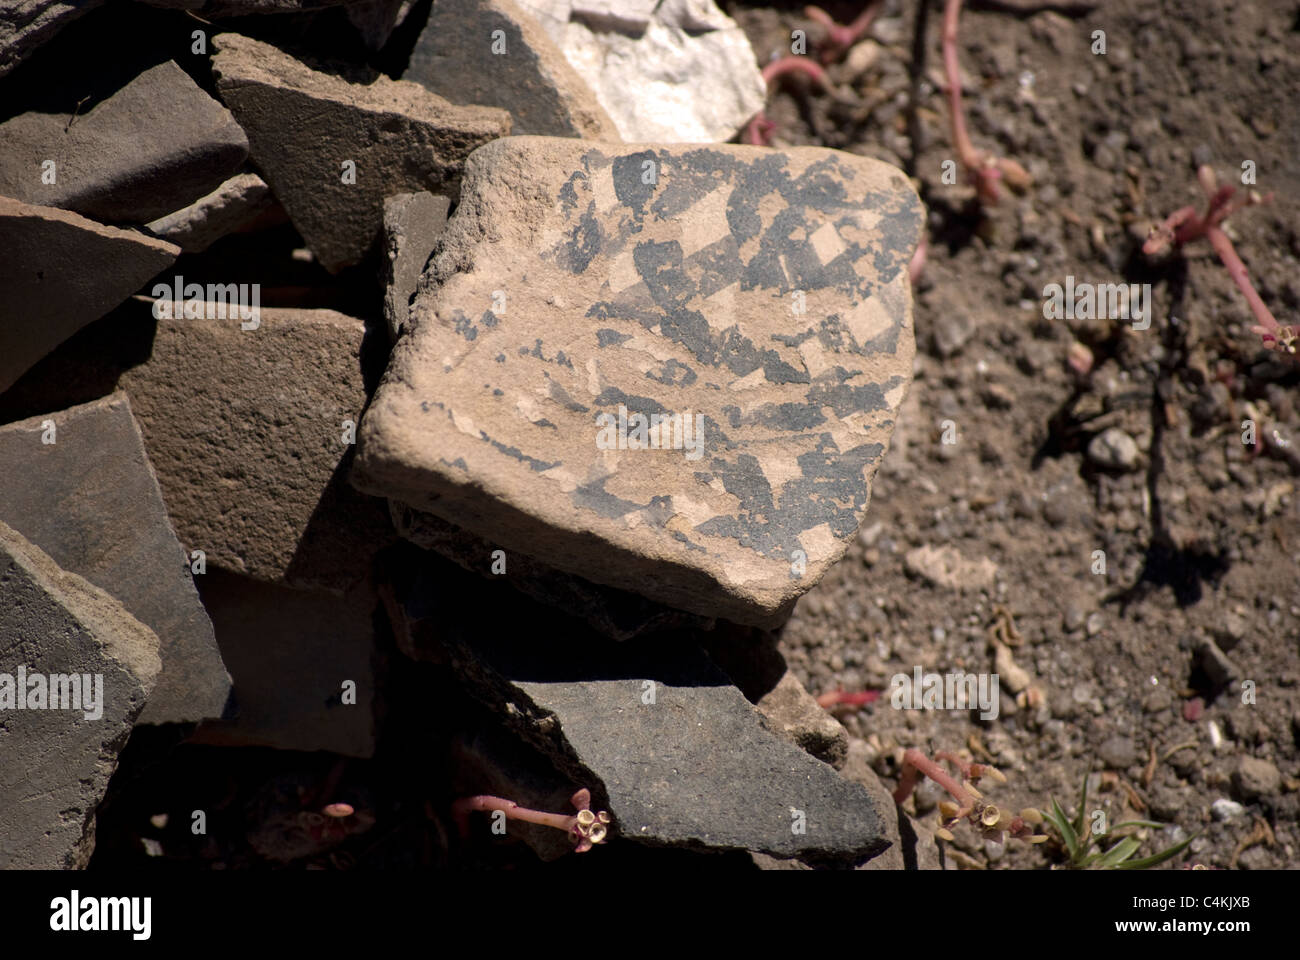 A grouping of Ancestral Pueblo pottery sherds found at Tsankawi: Bandelier National Monument. Stock Photo